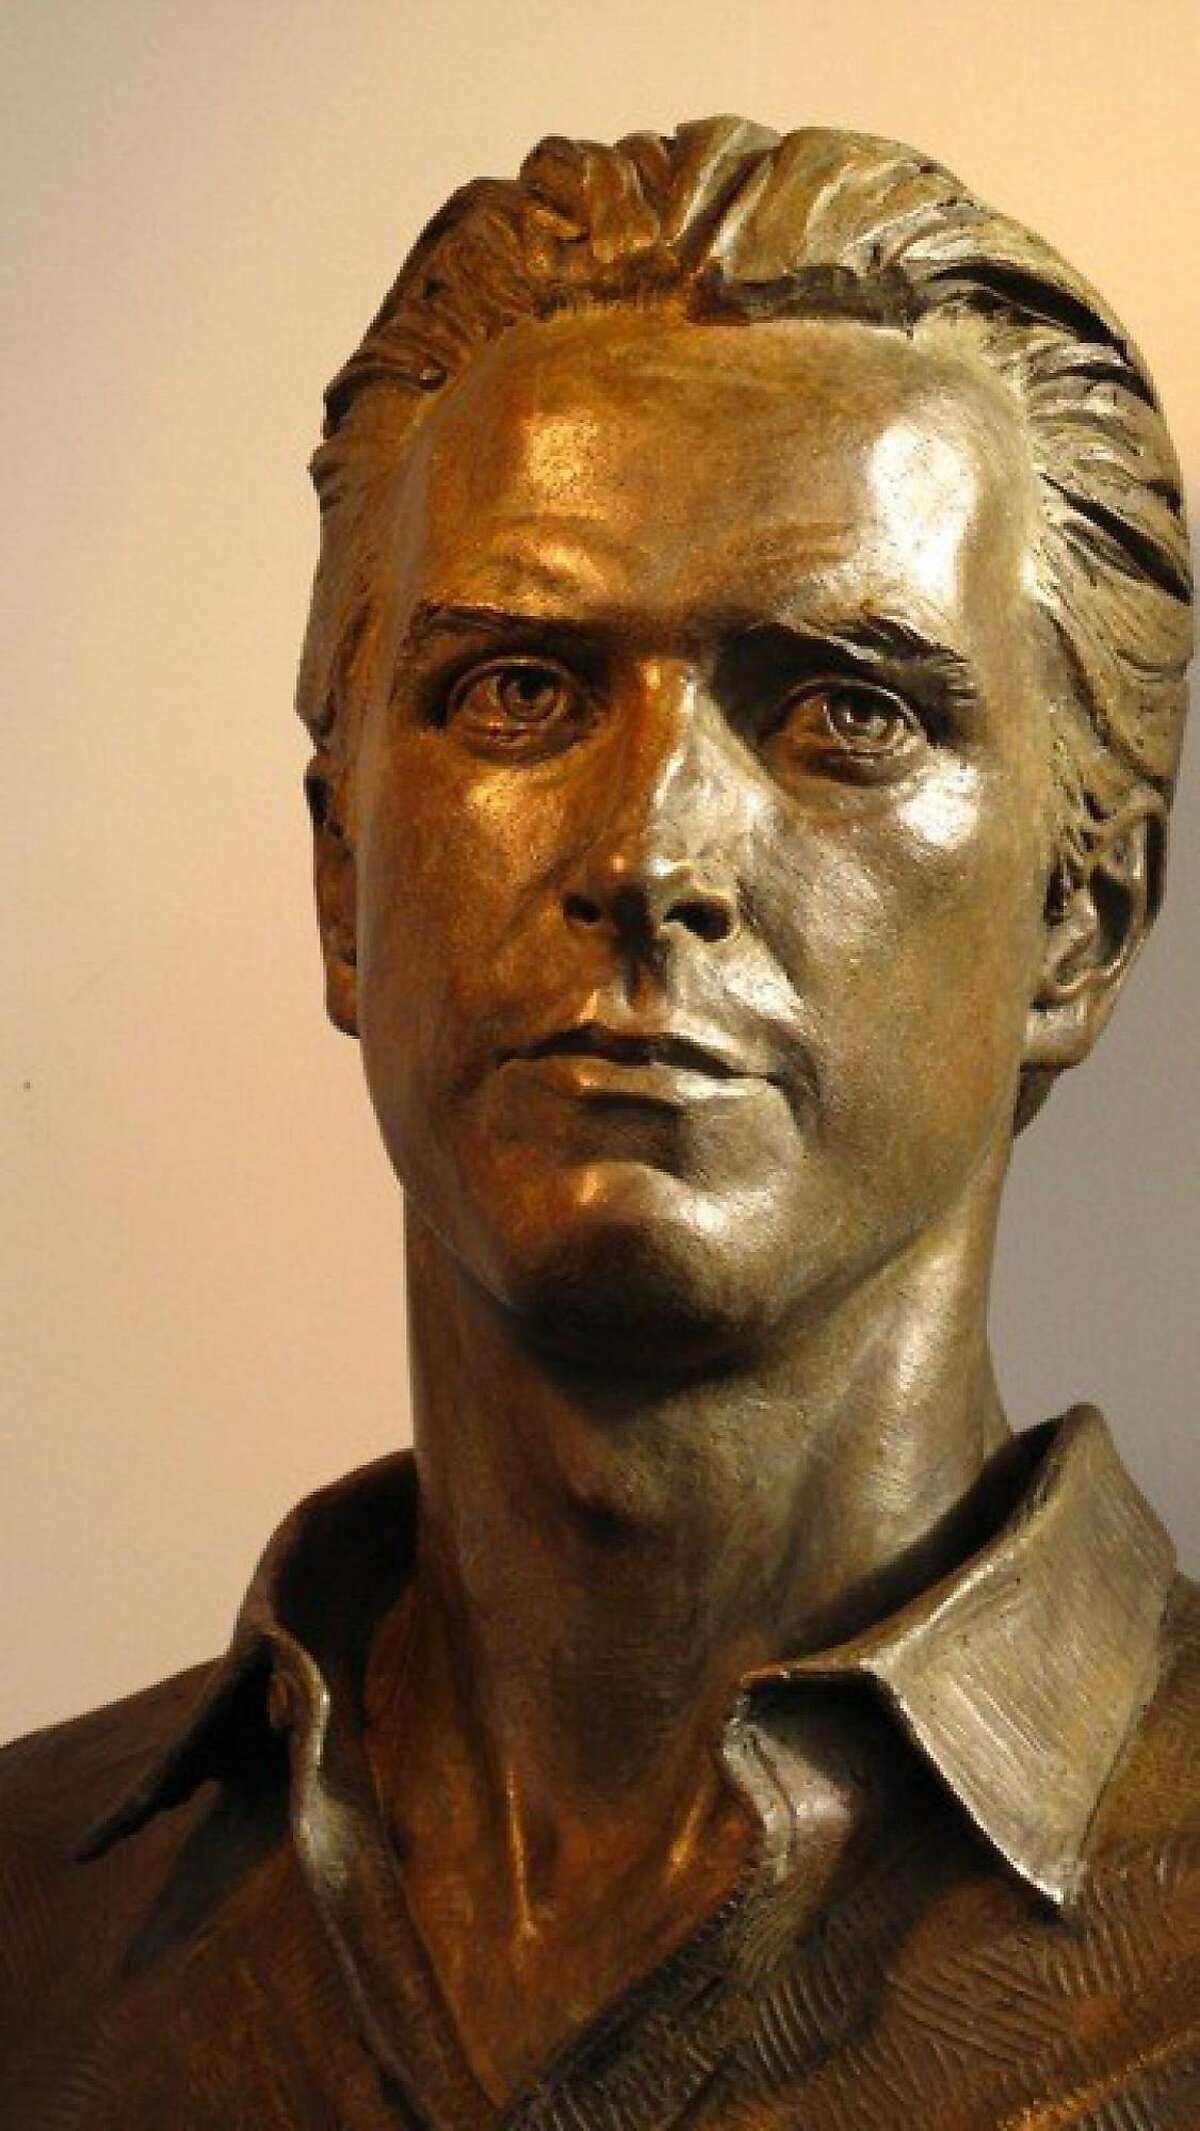 The bronze cast of the bust of former Mayor Gavin Newsom by Bruce Wolfe. The bust is an intended gift to the City by ArtCare, a nonprofit organization.